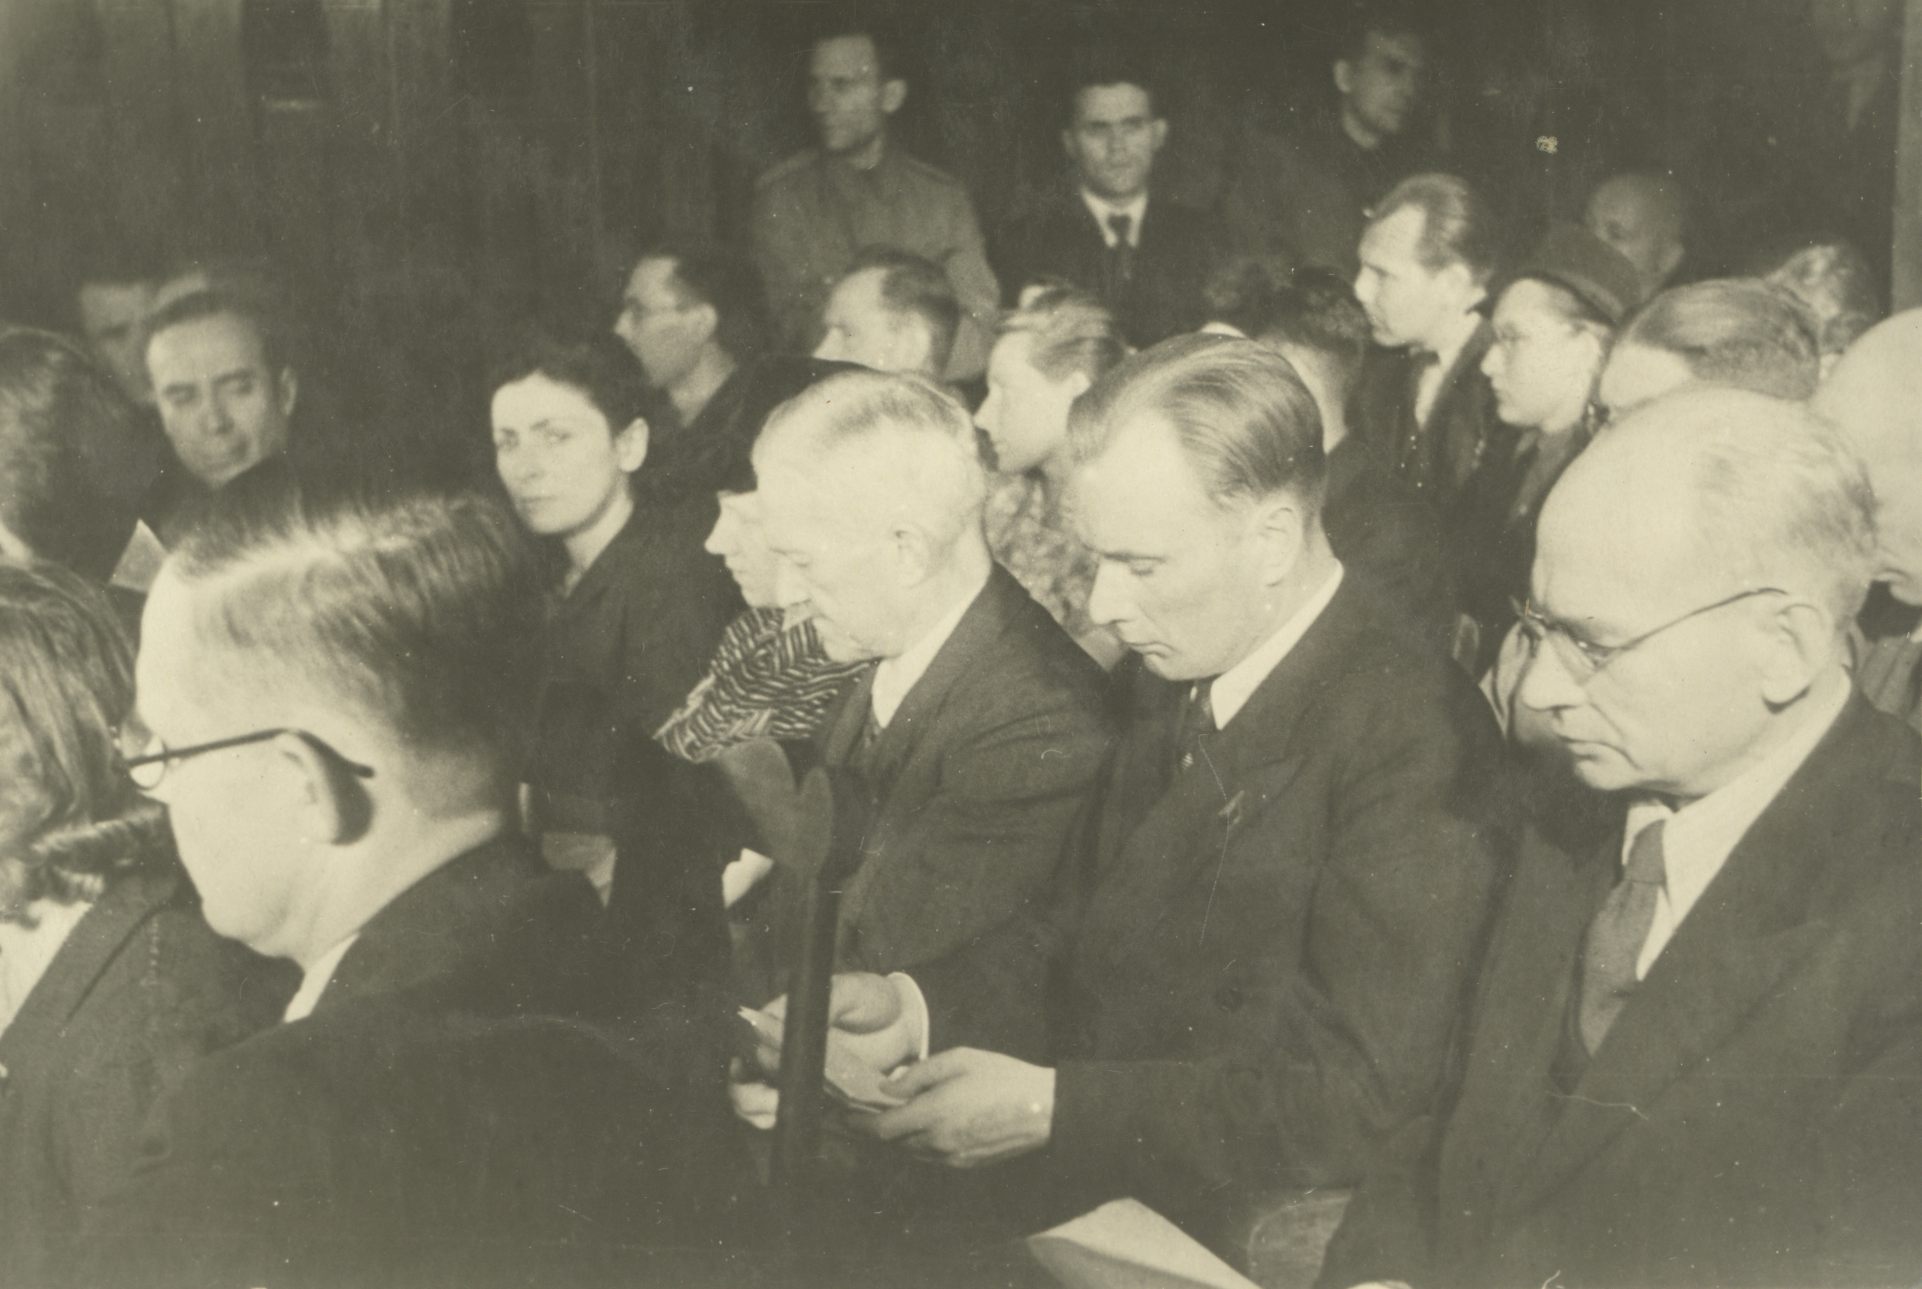 Founding of the Association of Writers in 1943. Second row: 1) August Alle, 2) Paul Rummo, 4) Olga Lauristin, 6) Eugen Kapp